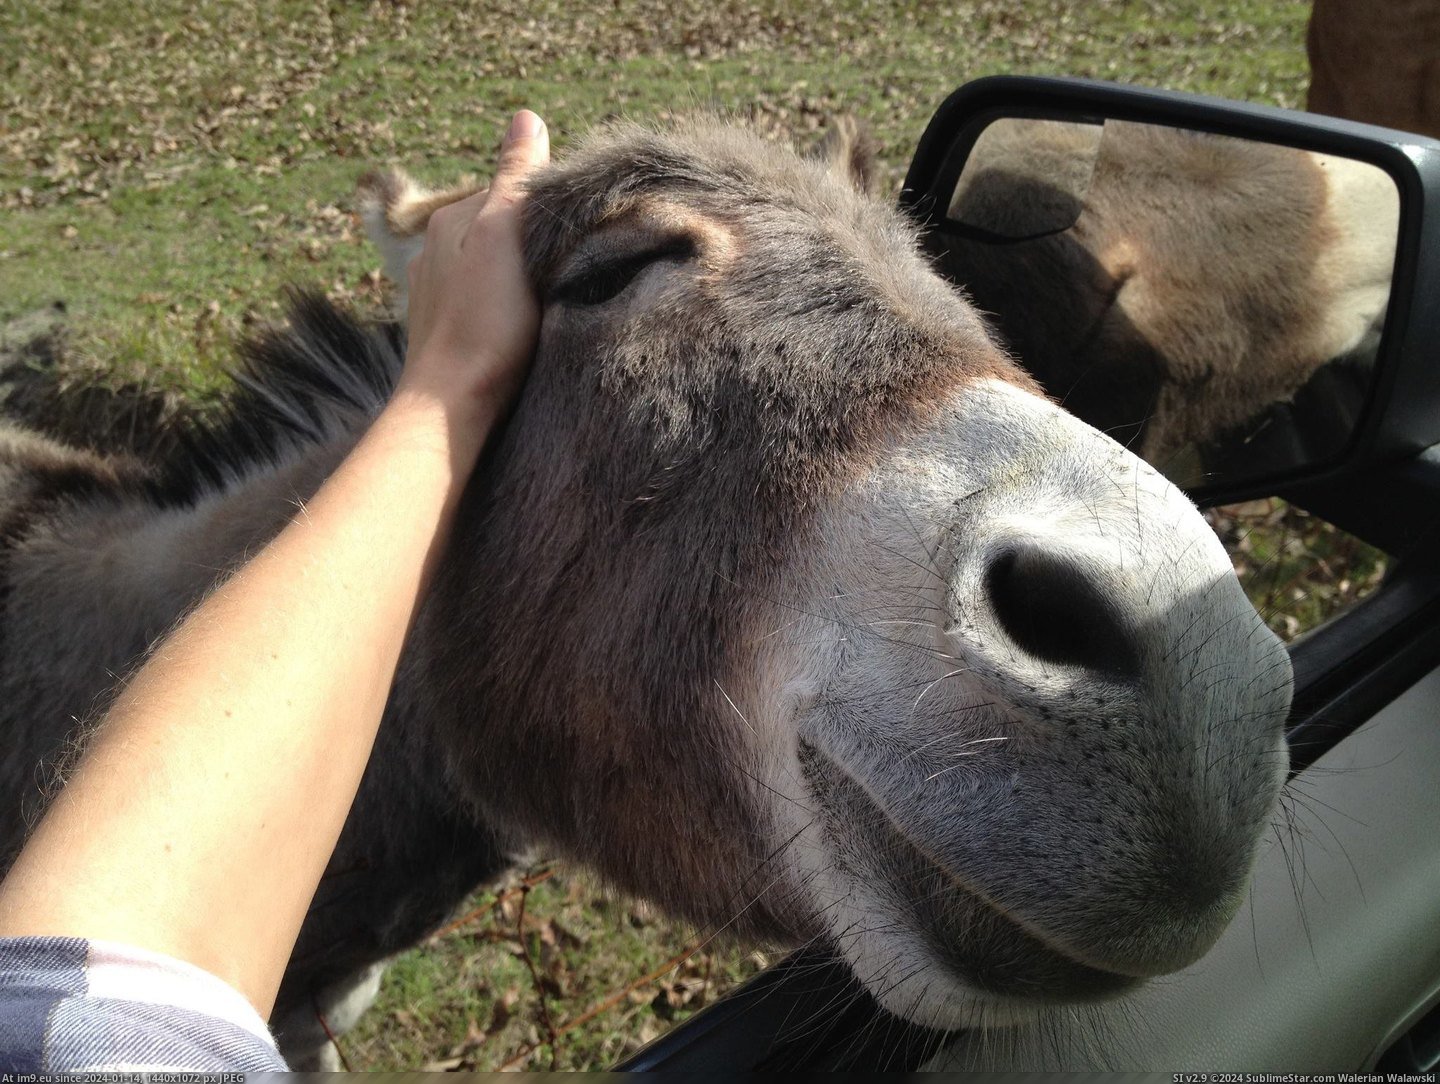 #Funny #Head #Mini #Scratch #Donkey #Neighbor #Chase #Driveway [Funny] My neighbor has a mini donkey that will chase you up the driveway until you scratch his head. 2 Pic. (Obraz z album My r/FUNNY favs))